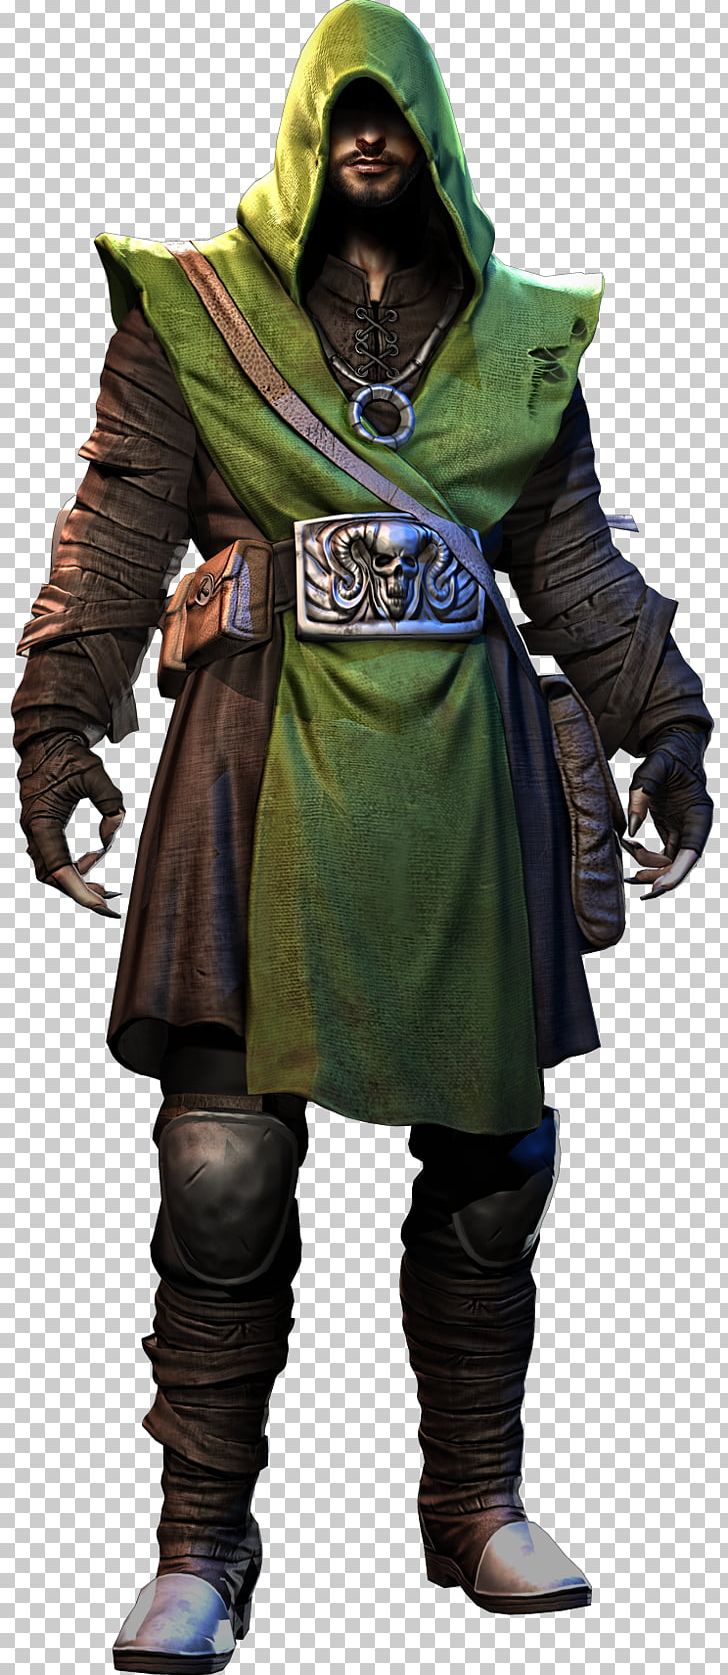 Victor Vran Dungeons & Dragons Pathfinder Roleplaying Game Sorcerer Role-playing Game PNG, Clipart, Amp, Character, Character Class, Costume, Costume Design Free PNG Download